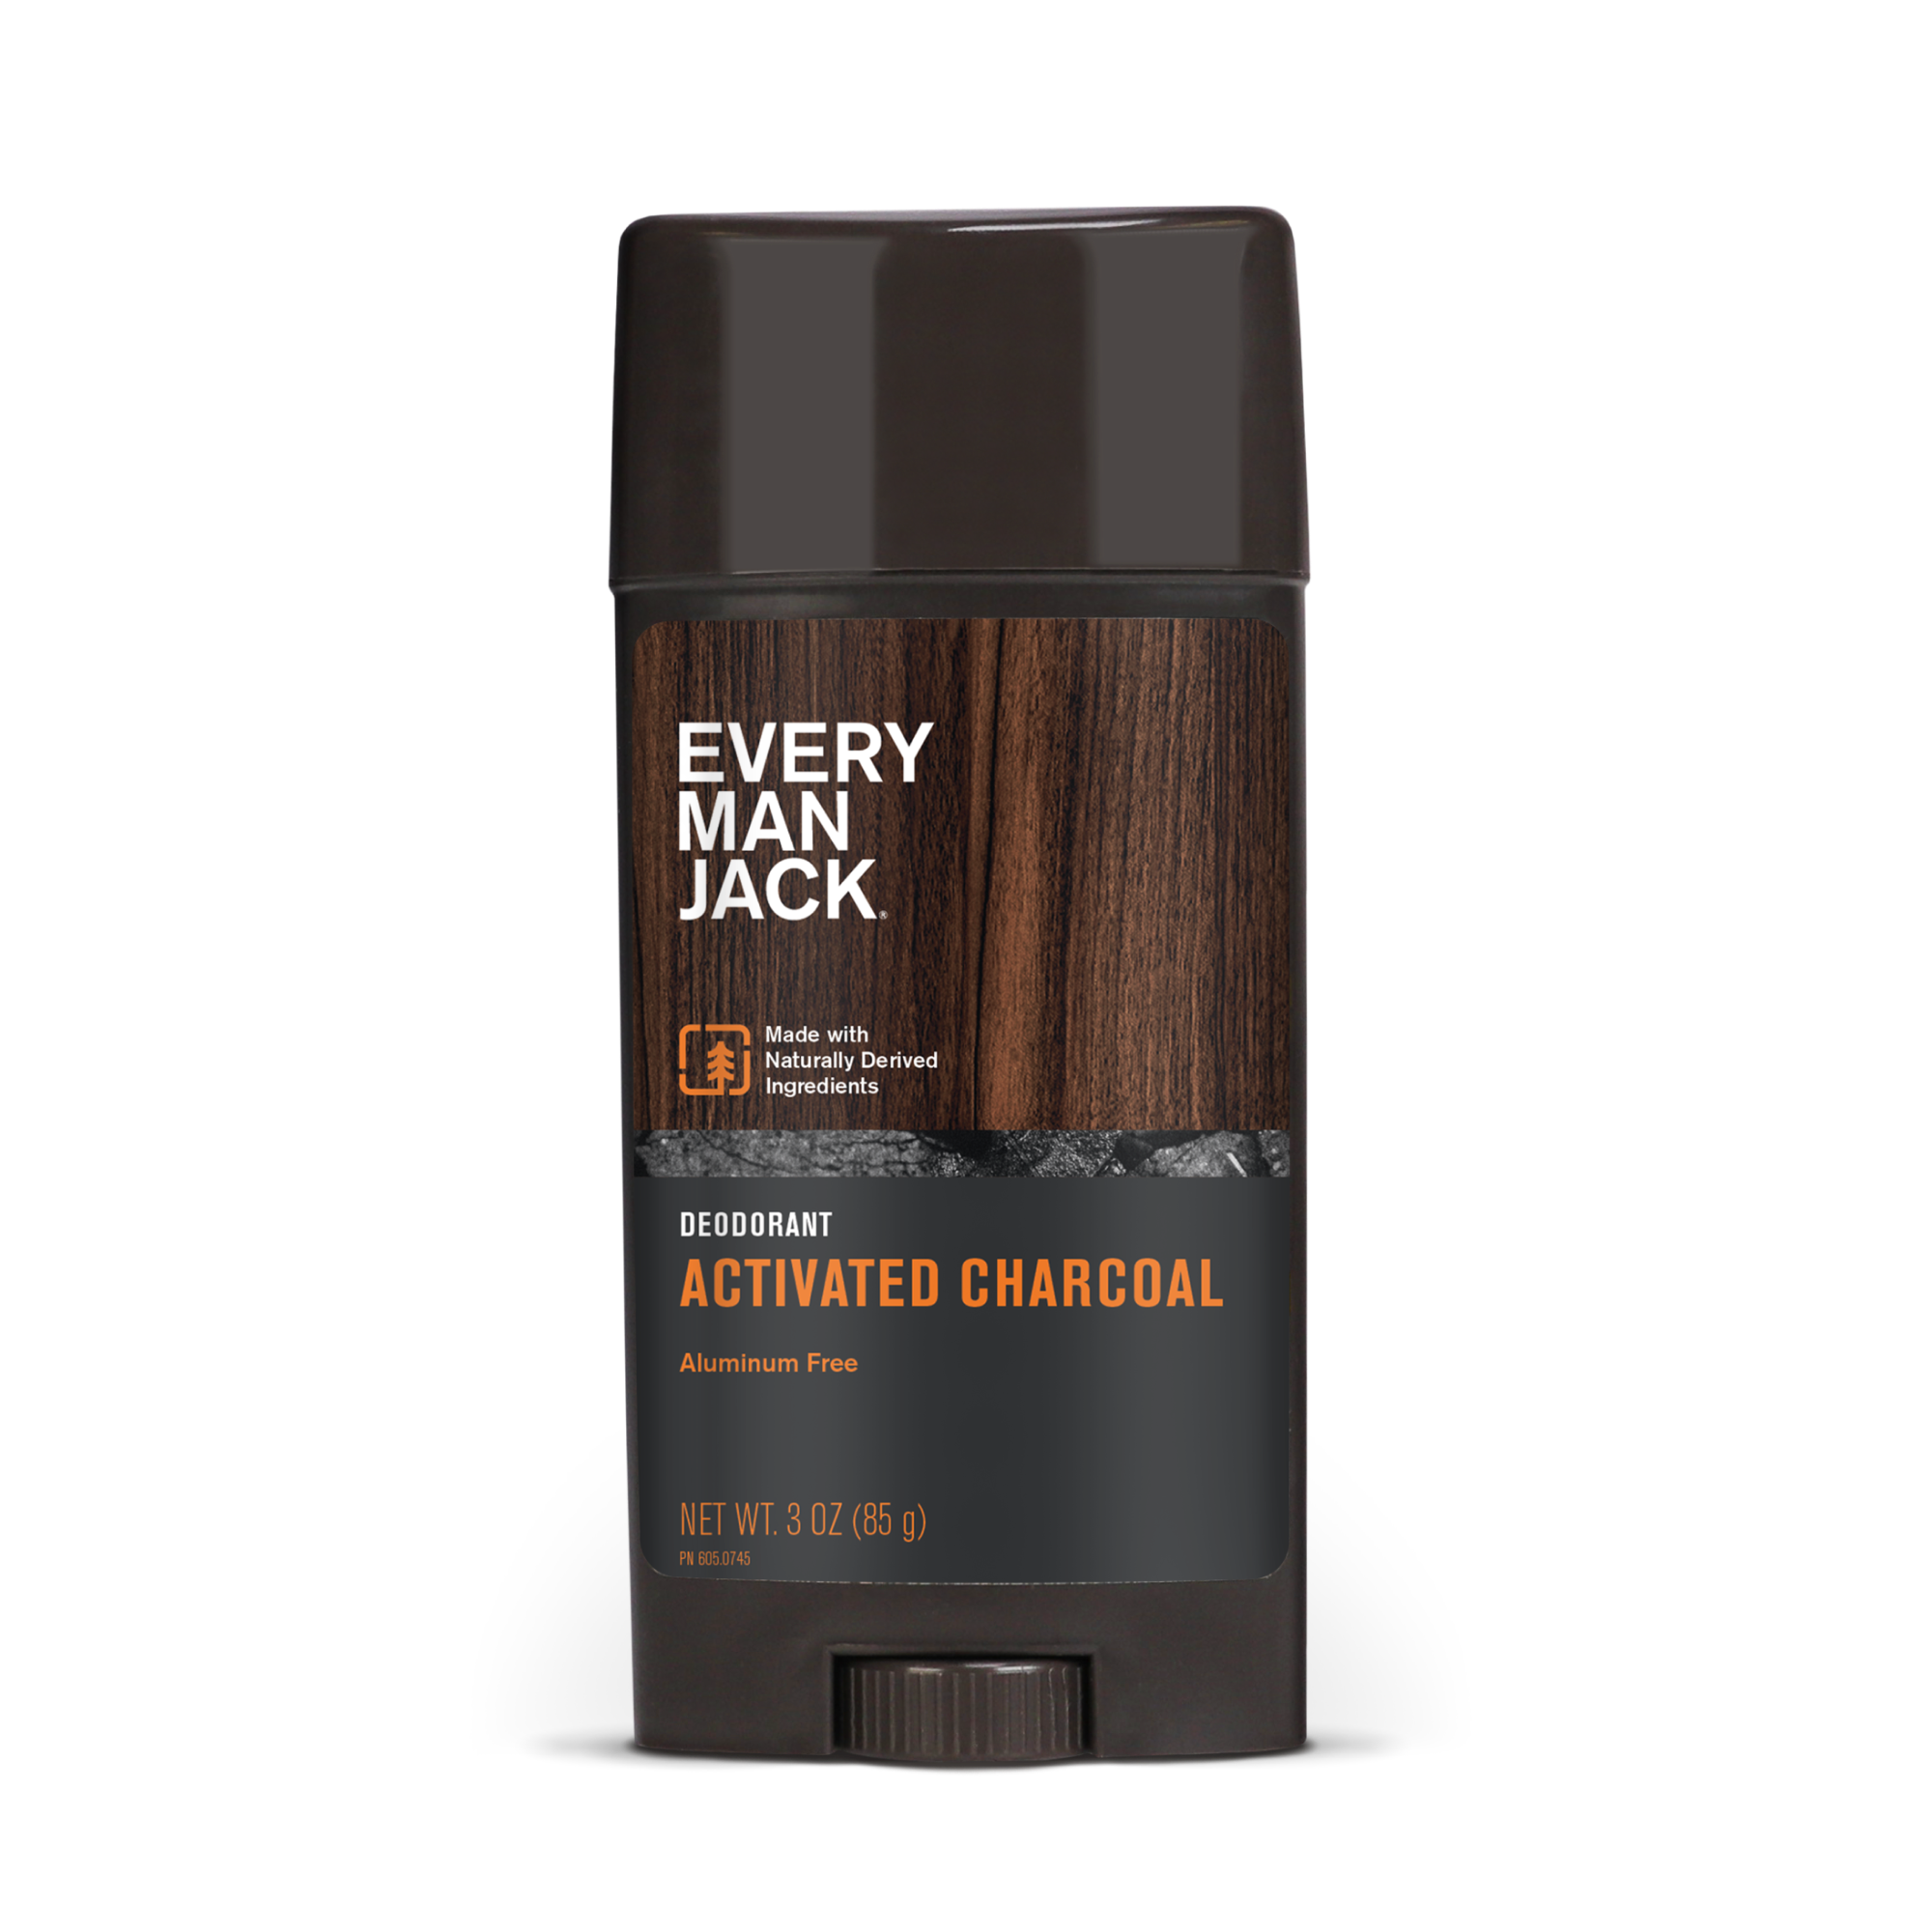 filosof Cruelty Horn Activated Charcoal Deodorant for Men - Every Man Jack